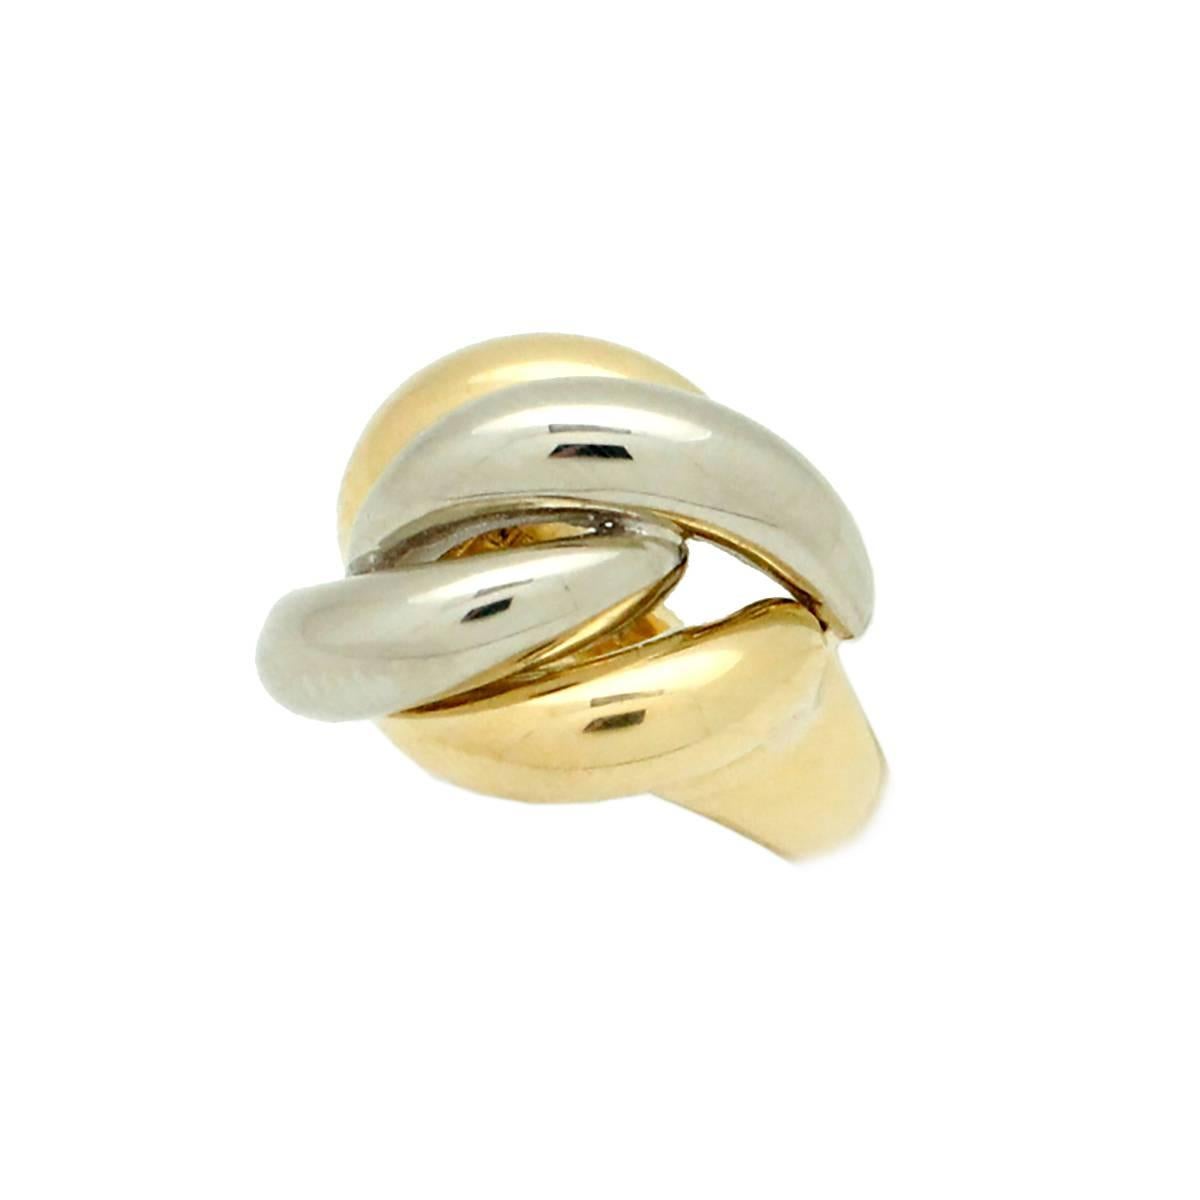 This gorgeous Signed Tiffany & Co. White and Yellow 18kt Gold Swirling Waves Ring is a size 3.5 and can be sized up or down for the client. This ring weighs 10.3grams and the top of the ring is .50 inches in width by .50 inches in length.

This